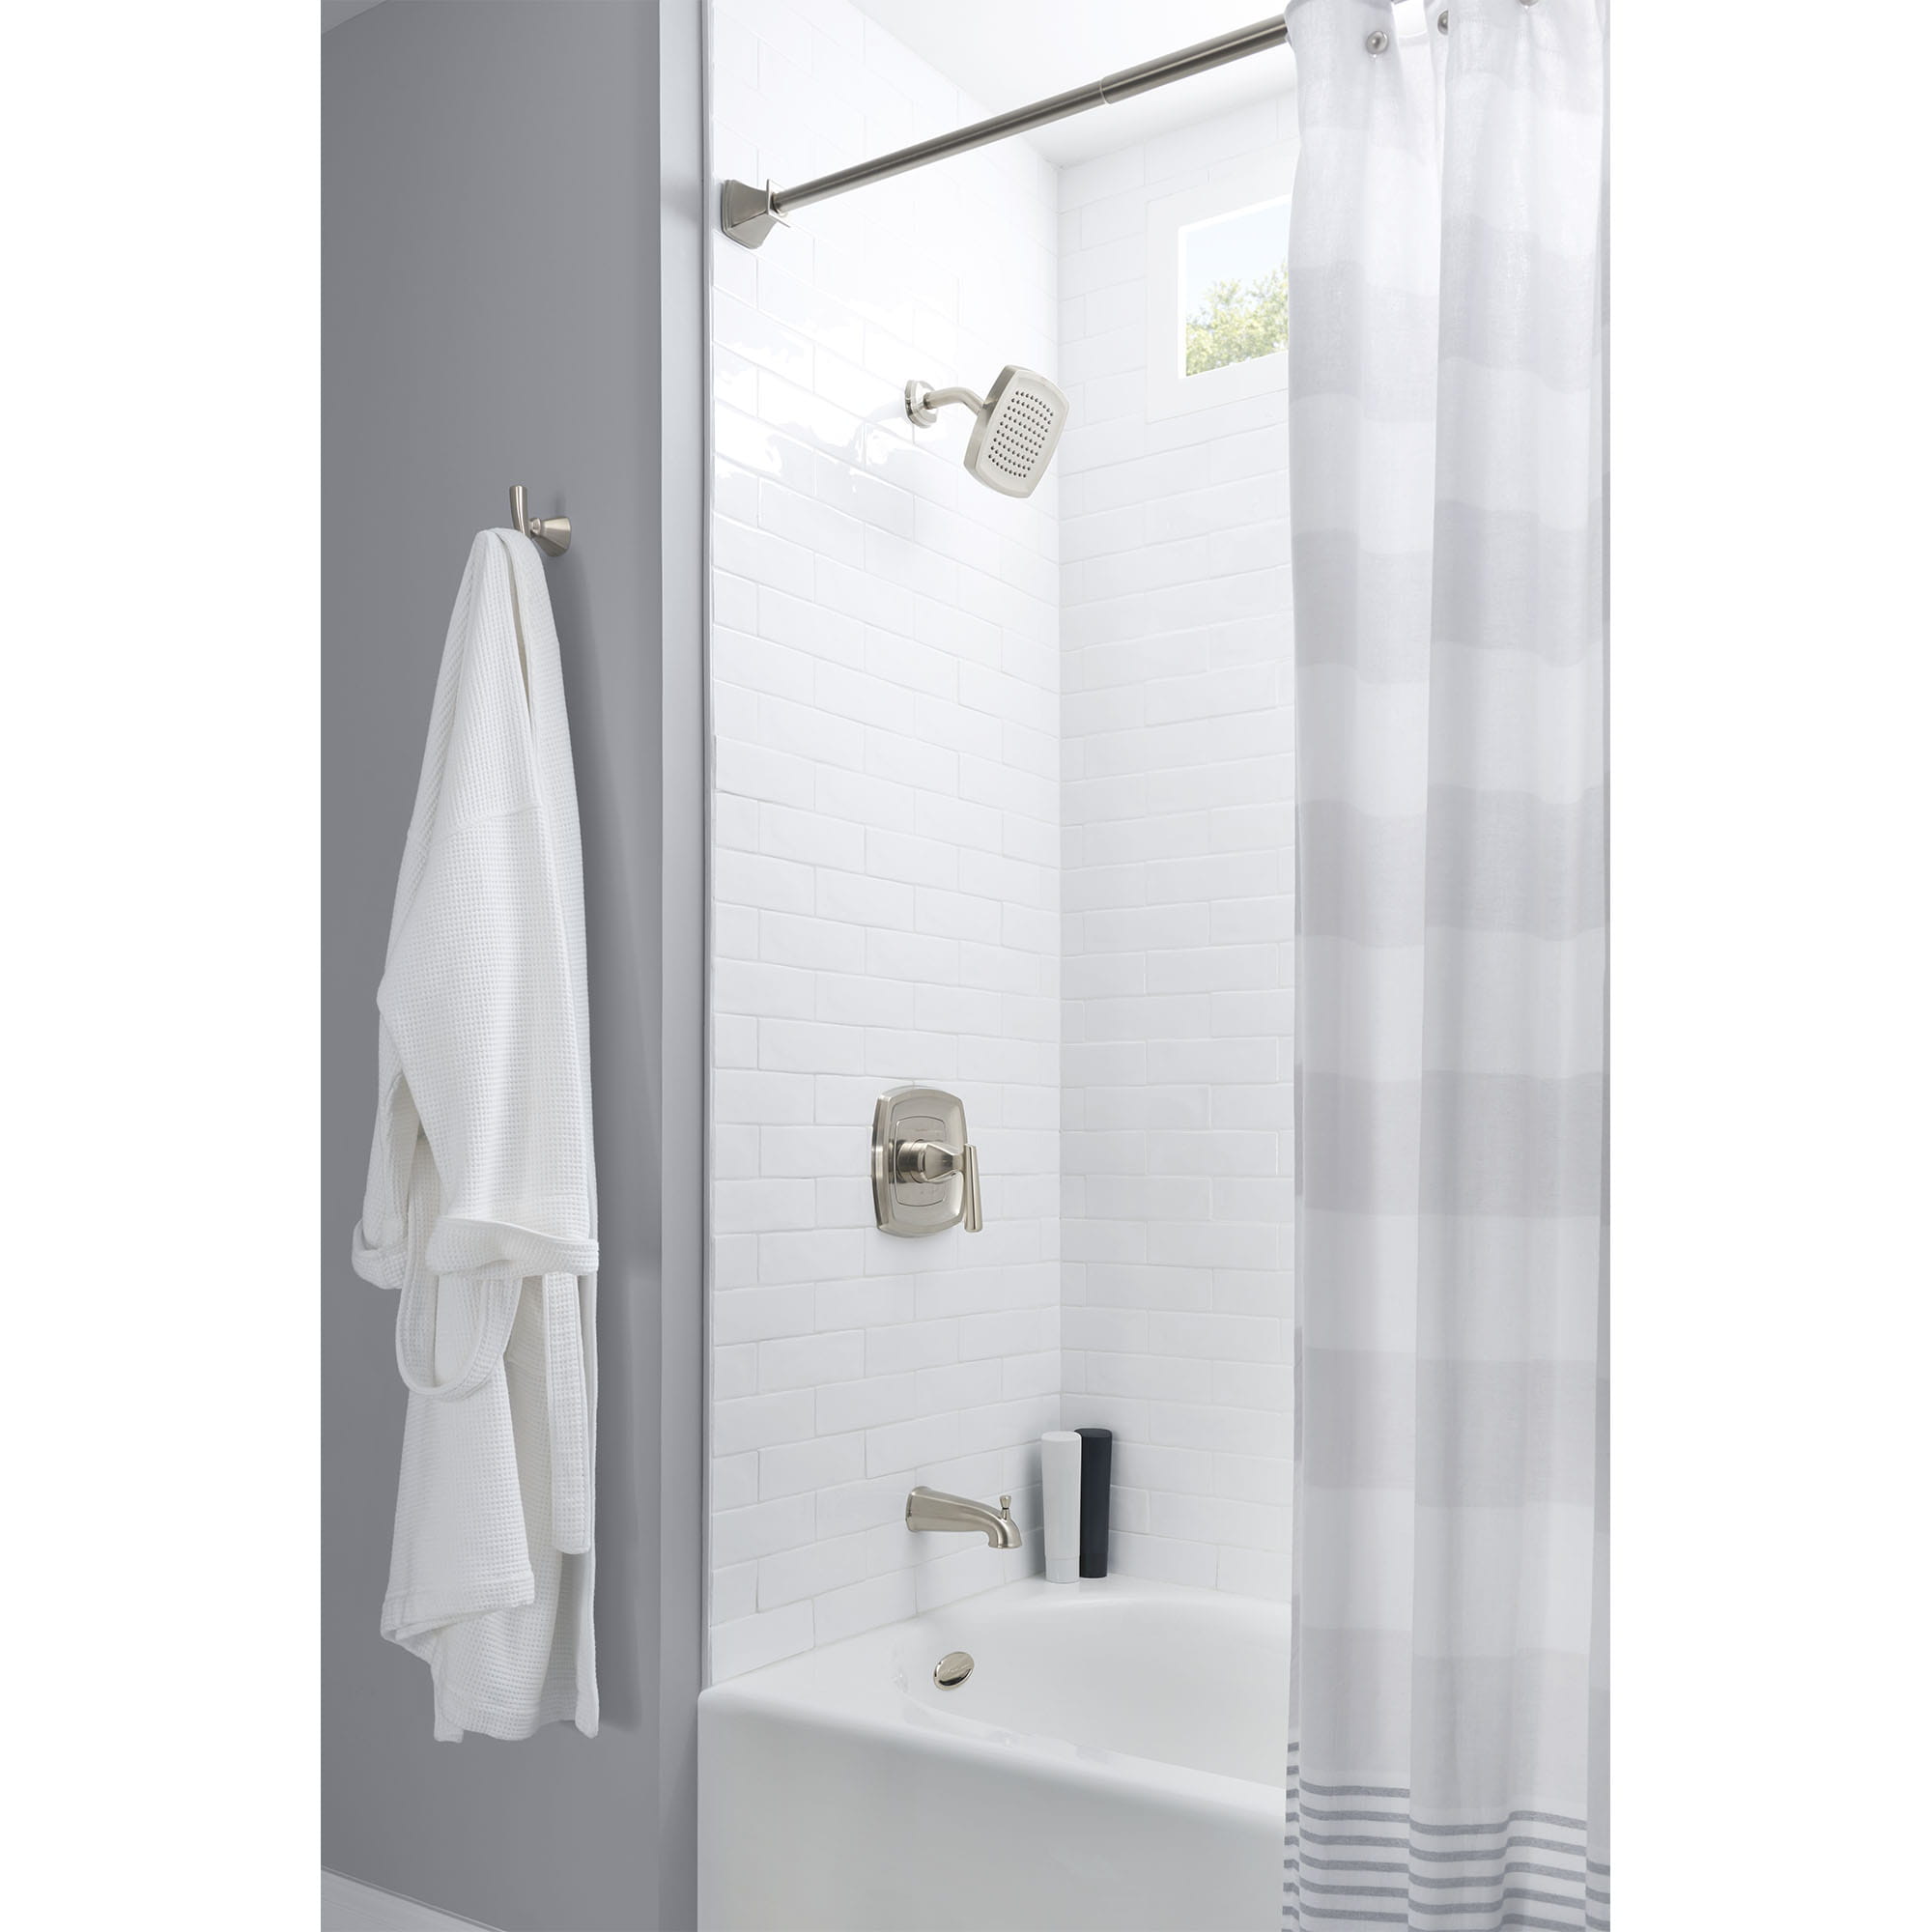 Edgemere 1.8 GPM Tub and Shower Trim Kit with Lever Handle